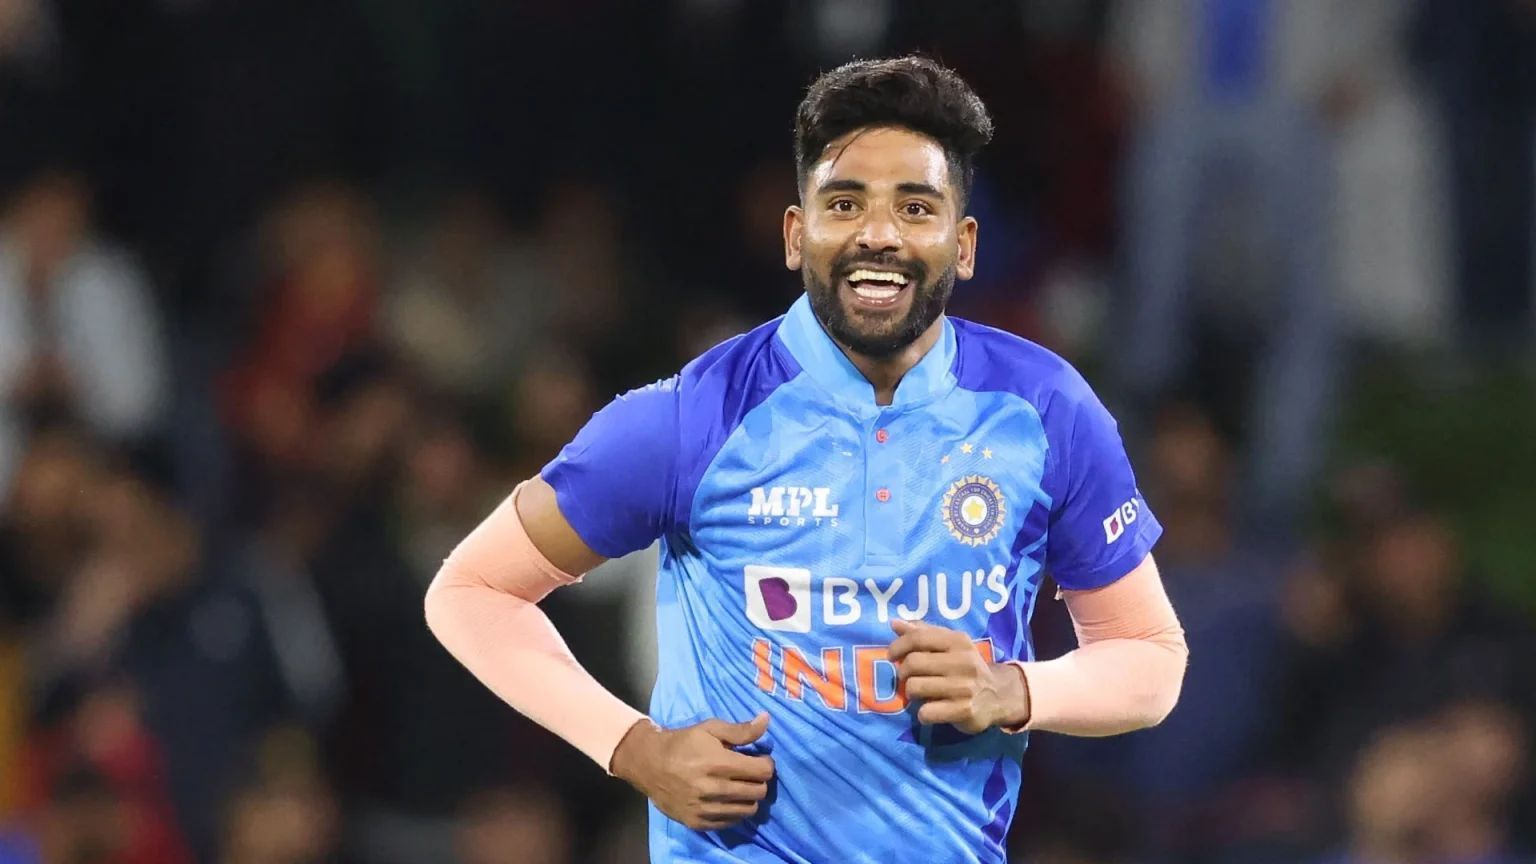 Mohammed Siraj is the world